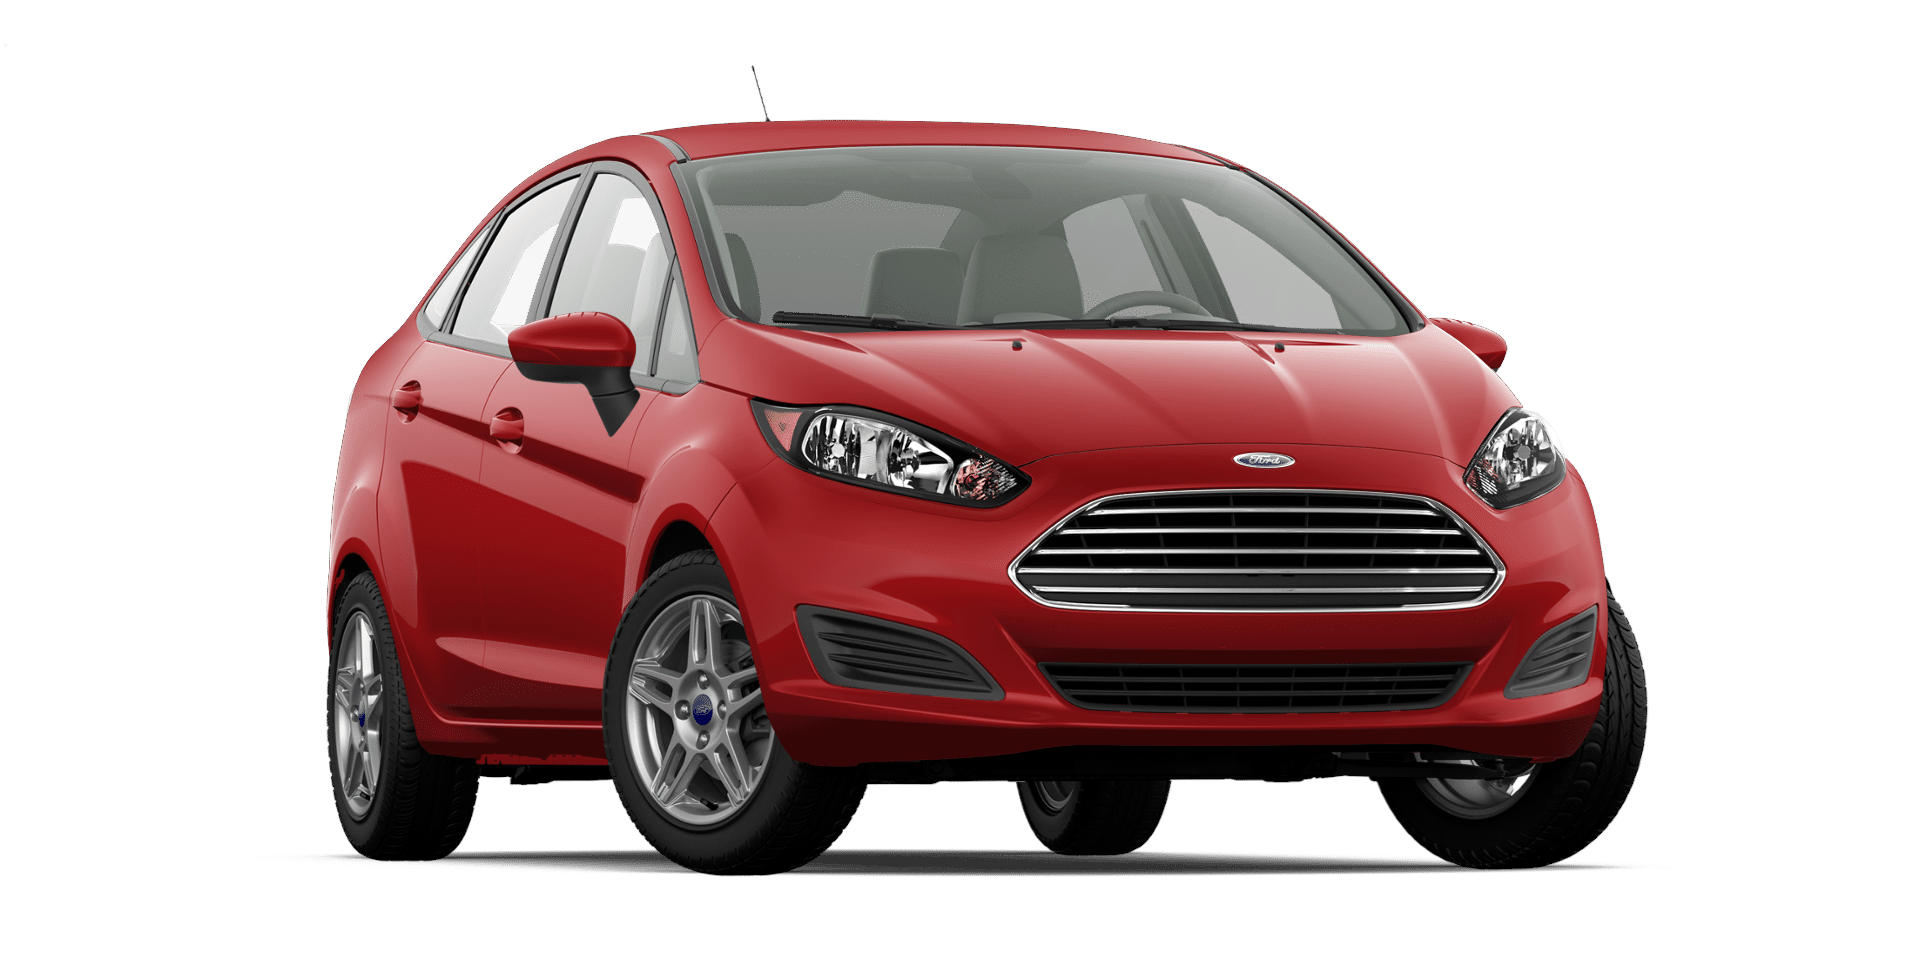 2019 Ford Fiesta Se Sedan Full Specs Features And Price Carbuzz